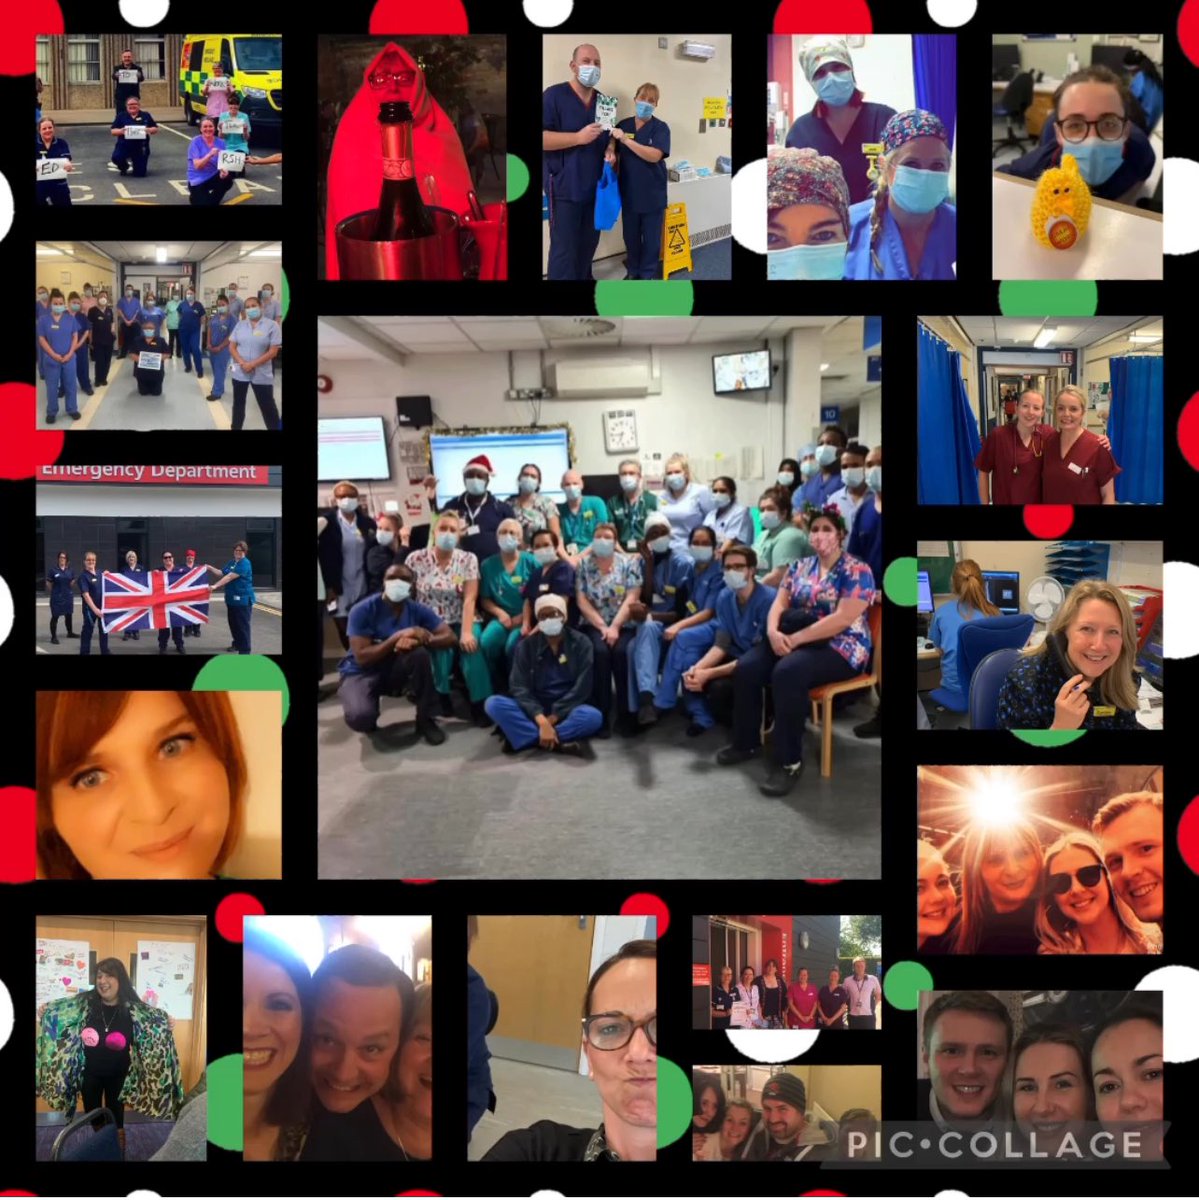 So after more than 20 years today marks my last day in the NHS! 💙What a privilege it has been 💙I have met so many incredible people & patients thank u to you all 💙but it is time to Move on.. 💙Excited for my new adventure as Director of Nursing Uk & Ireland @FMC_AG … 🚨🚑🏩